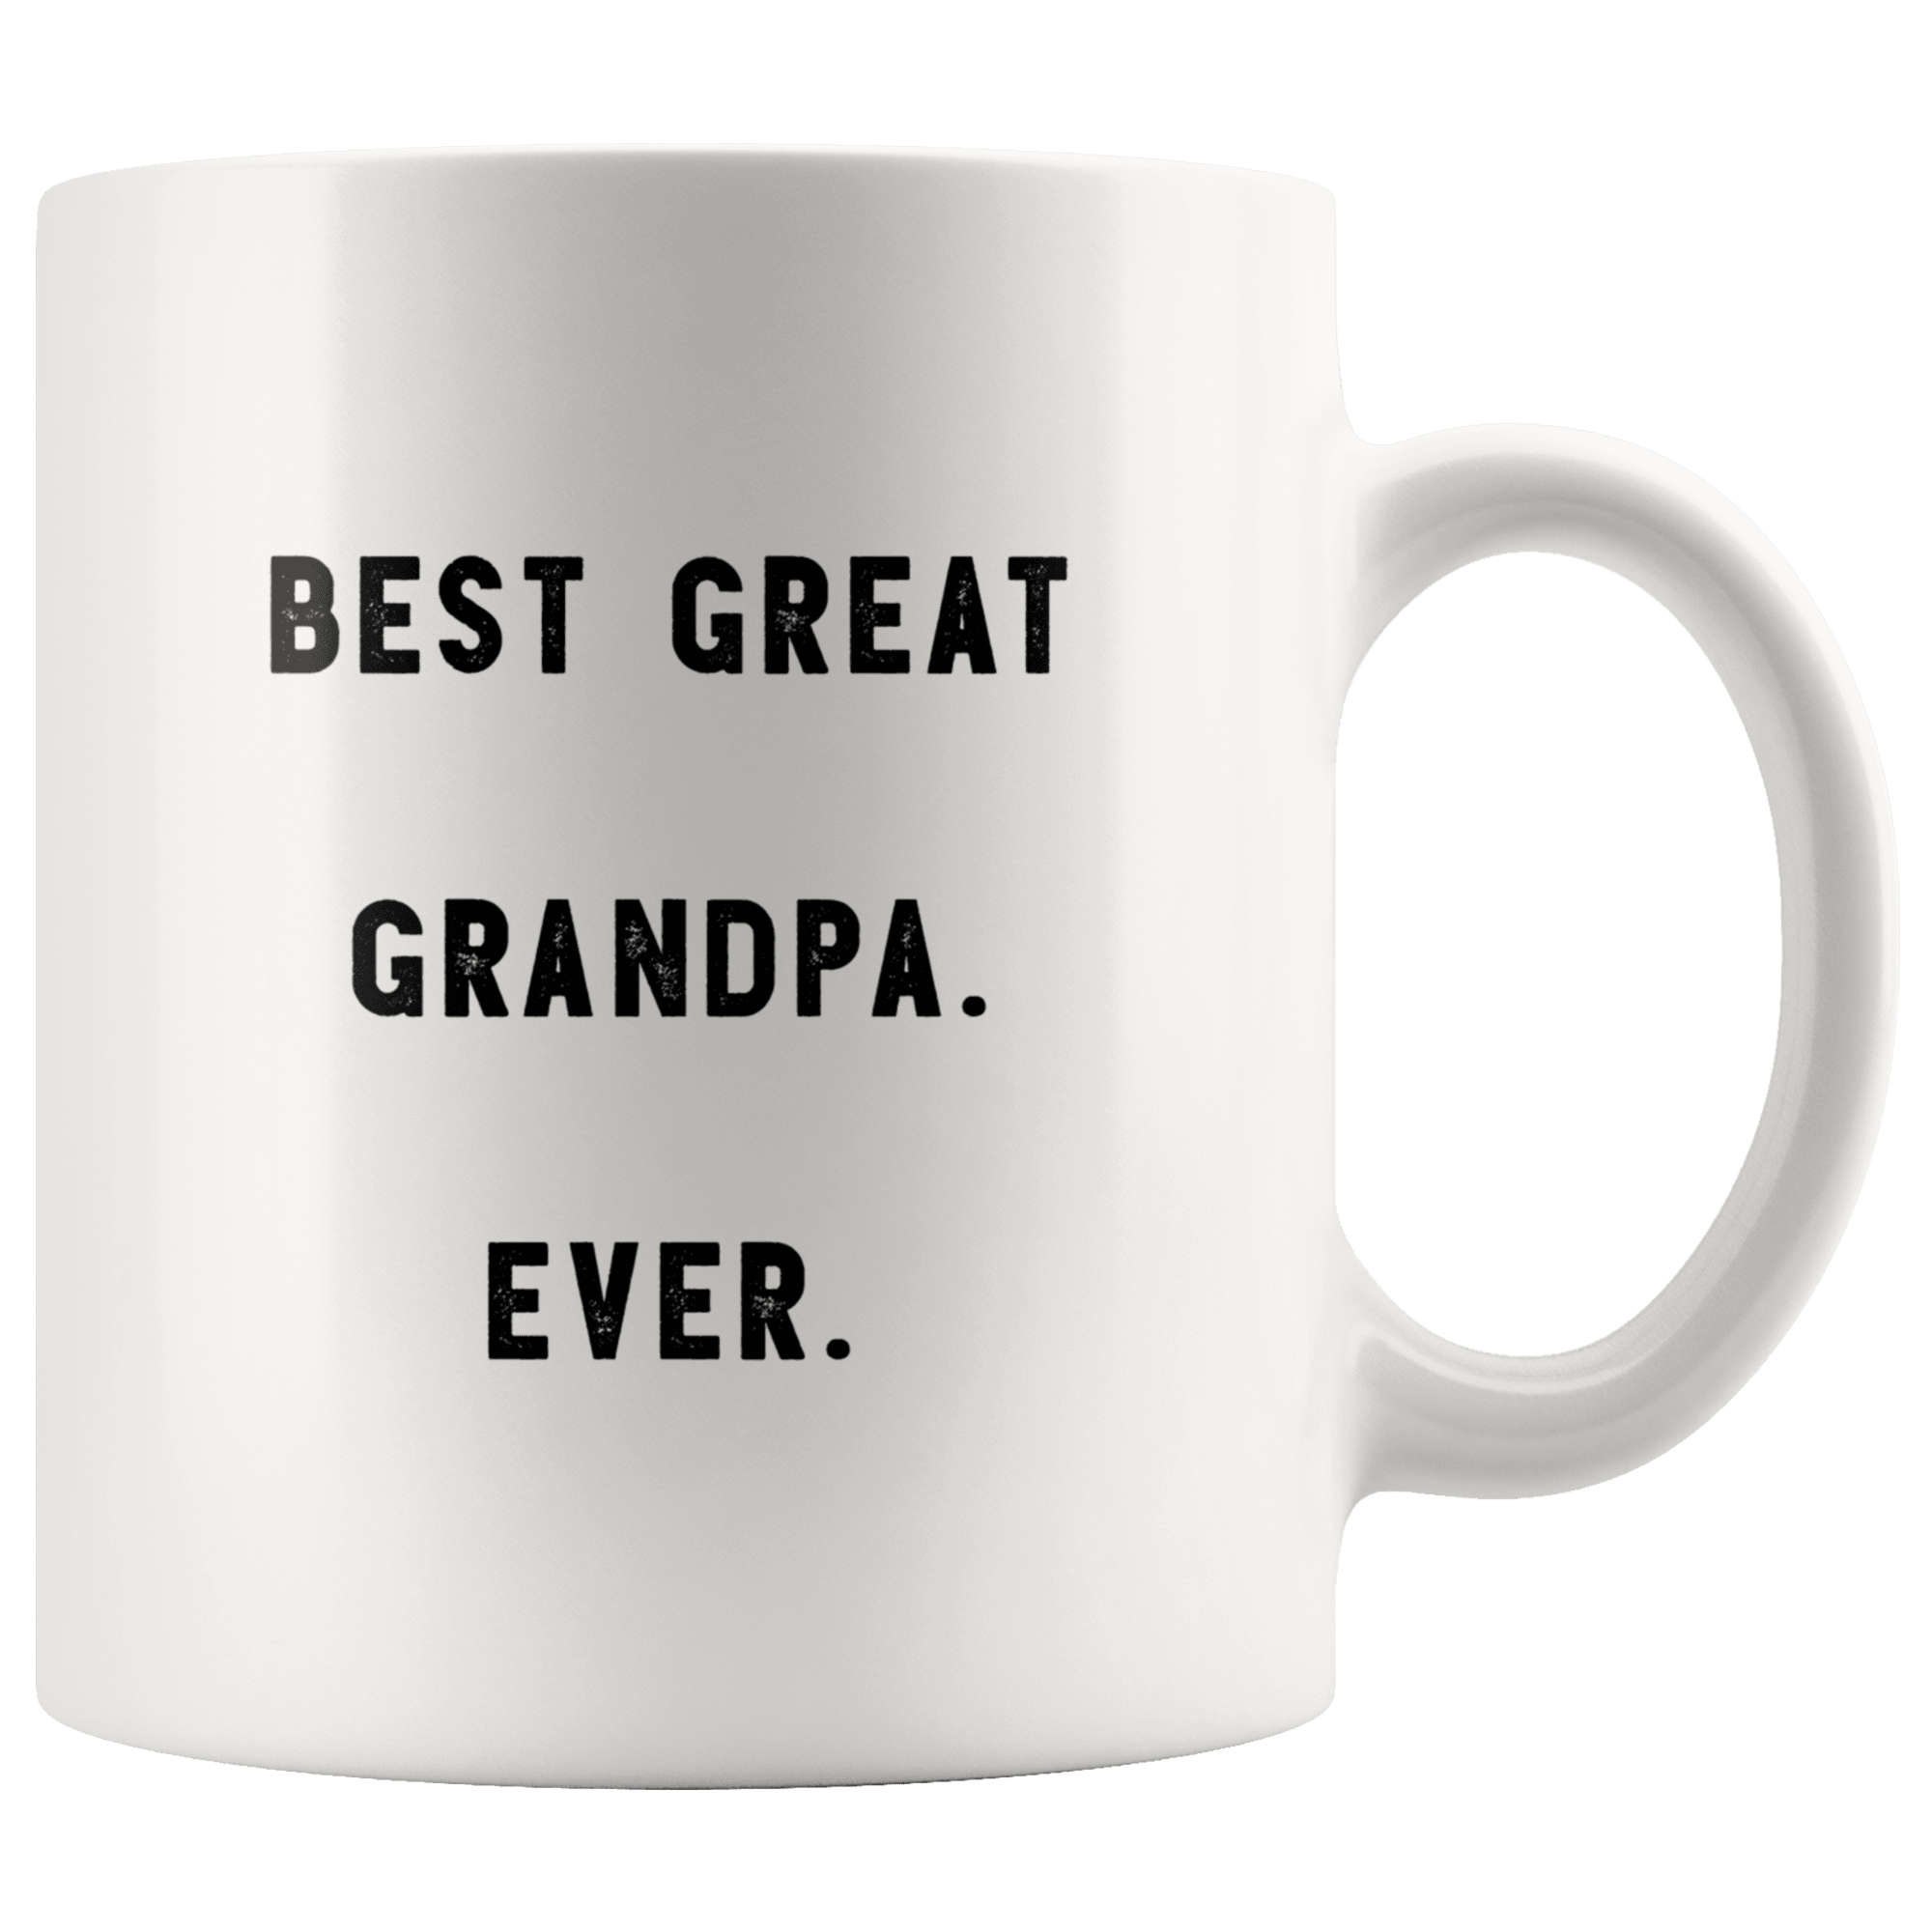 https://robustcreative.com/cdn/shop/products/best-great-grandpa-ever-the-funny-coworker-office-gag-gifts-white-11oz-mug-gift-idea-robustcreative-18446907_2000x.png?v=1576996153